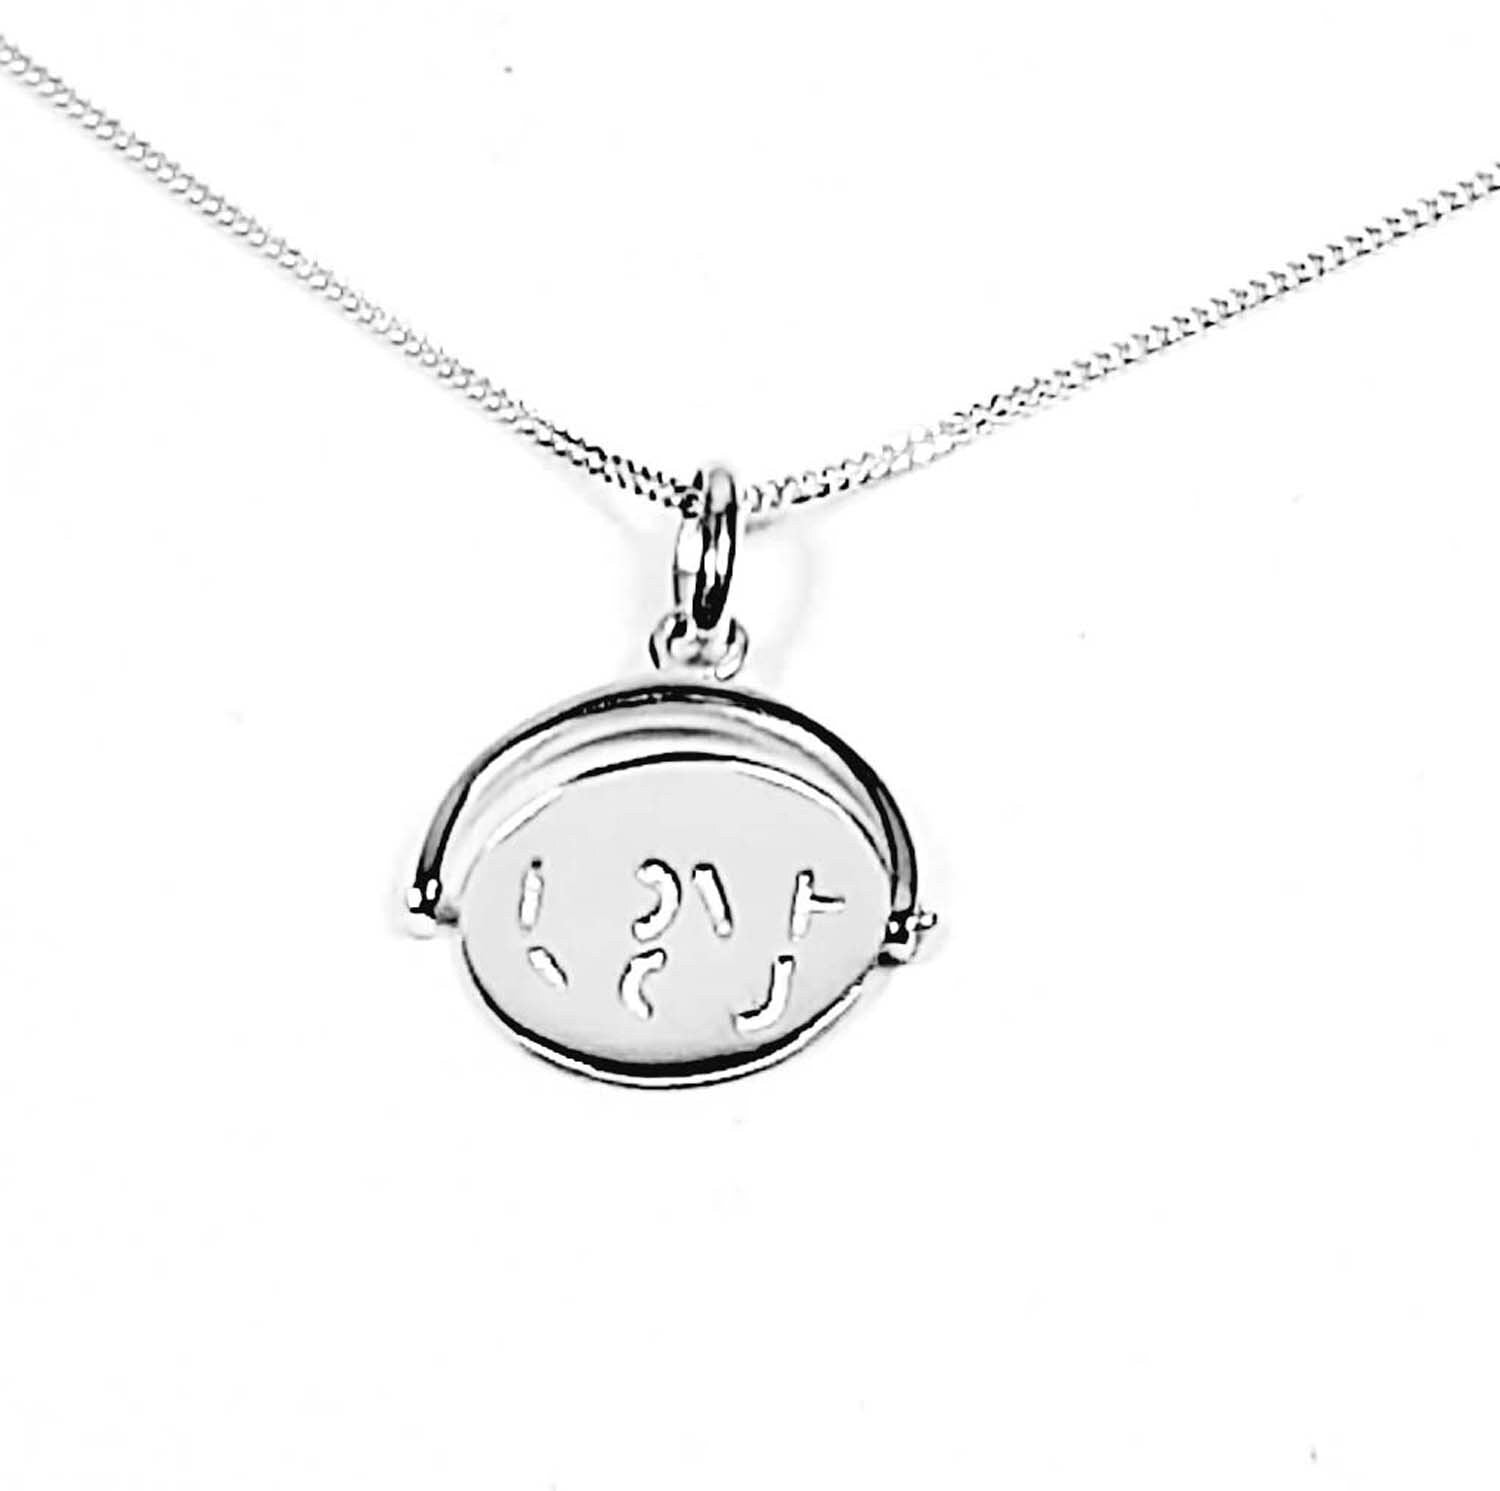 925 Sterling Silver I Love You Spinner Charm Necklace  -  Includes a Personalised Gift Message